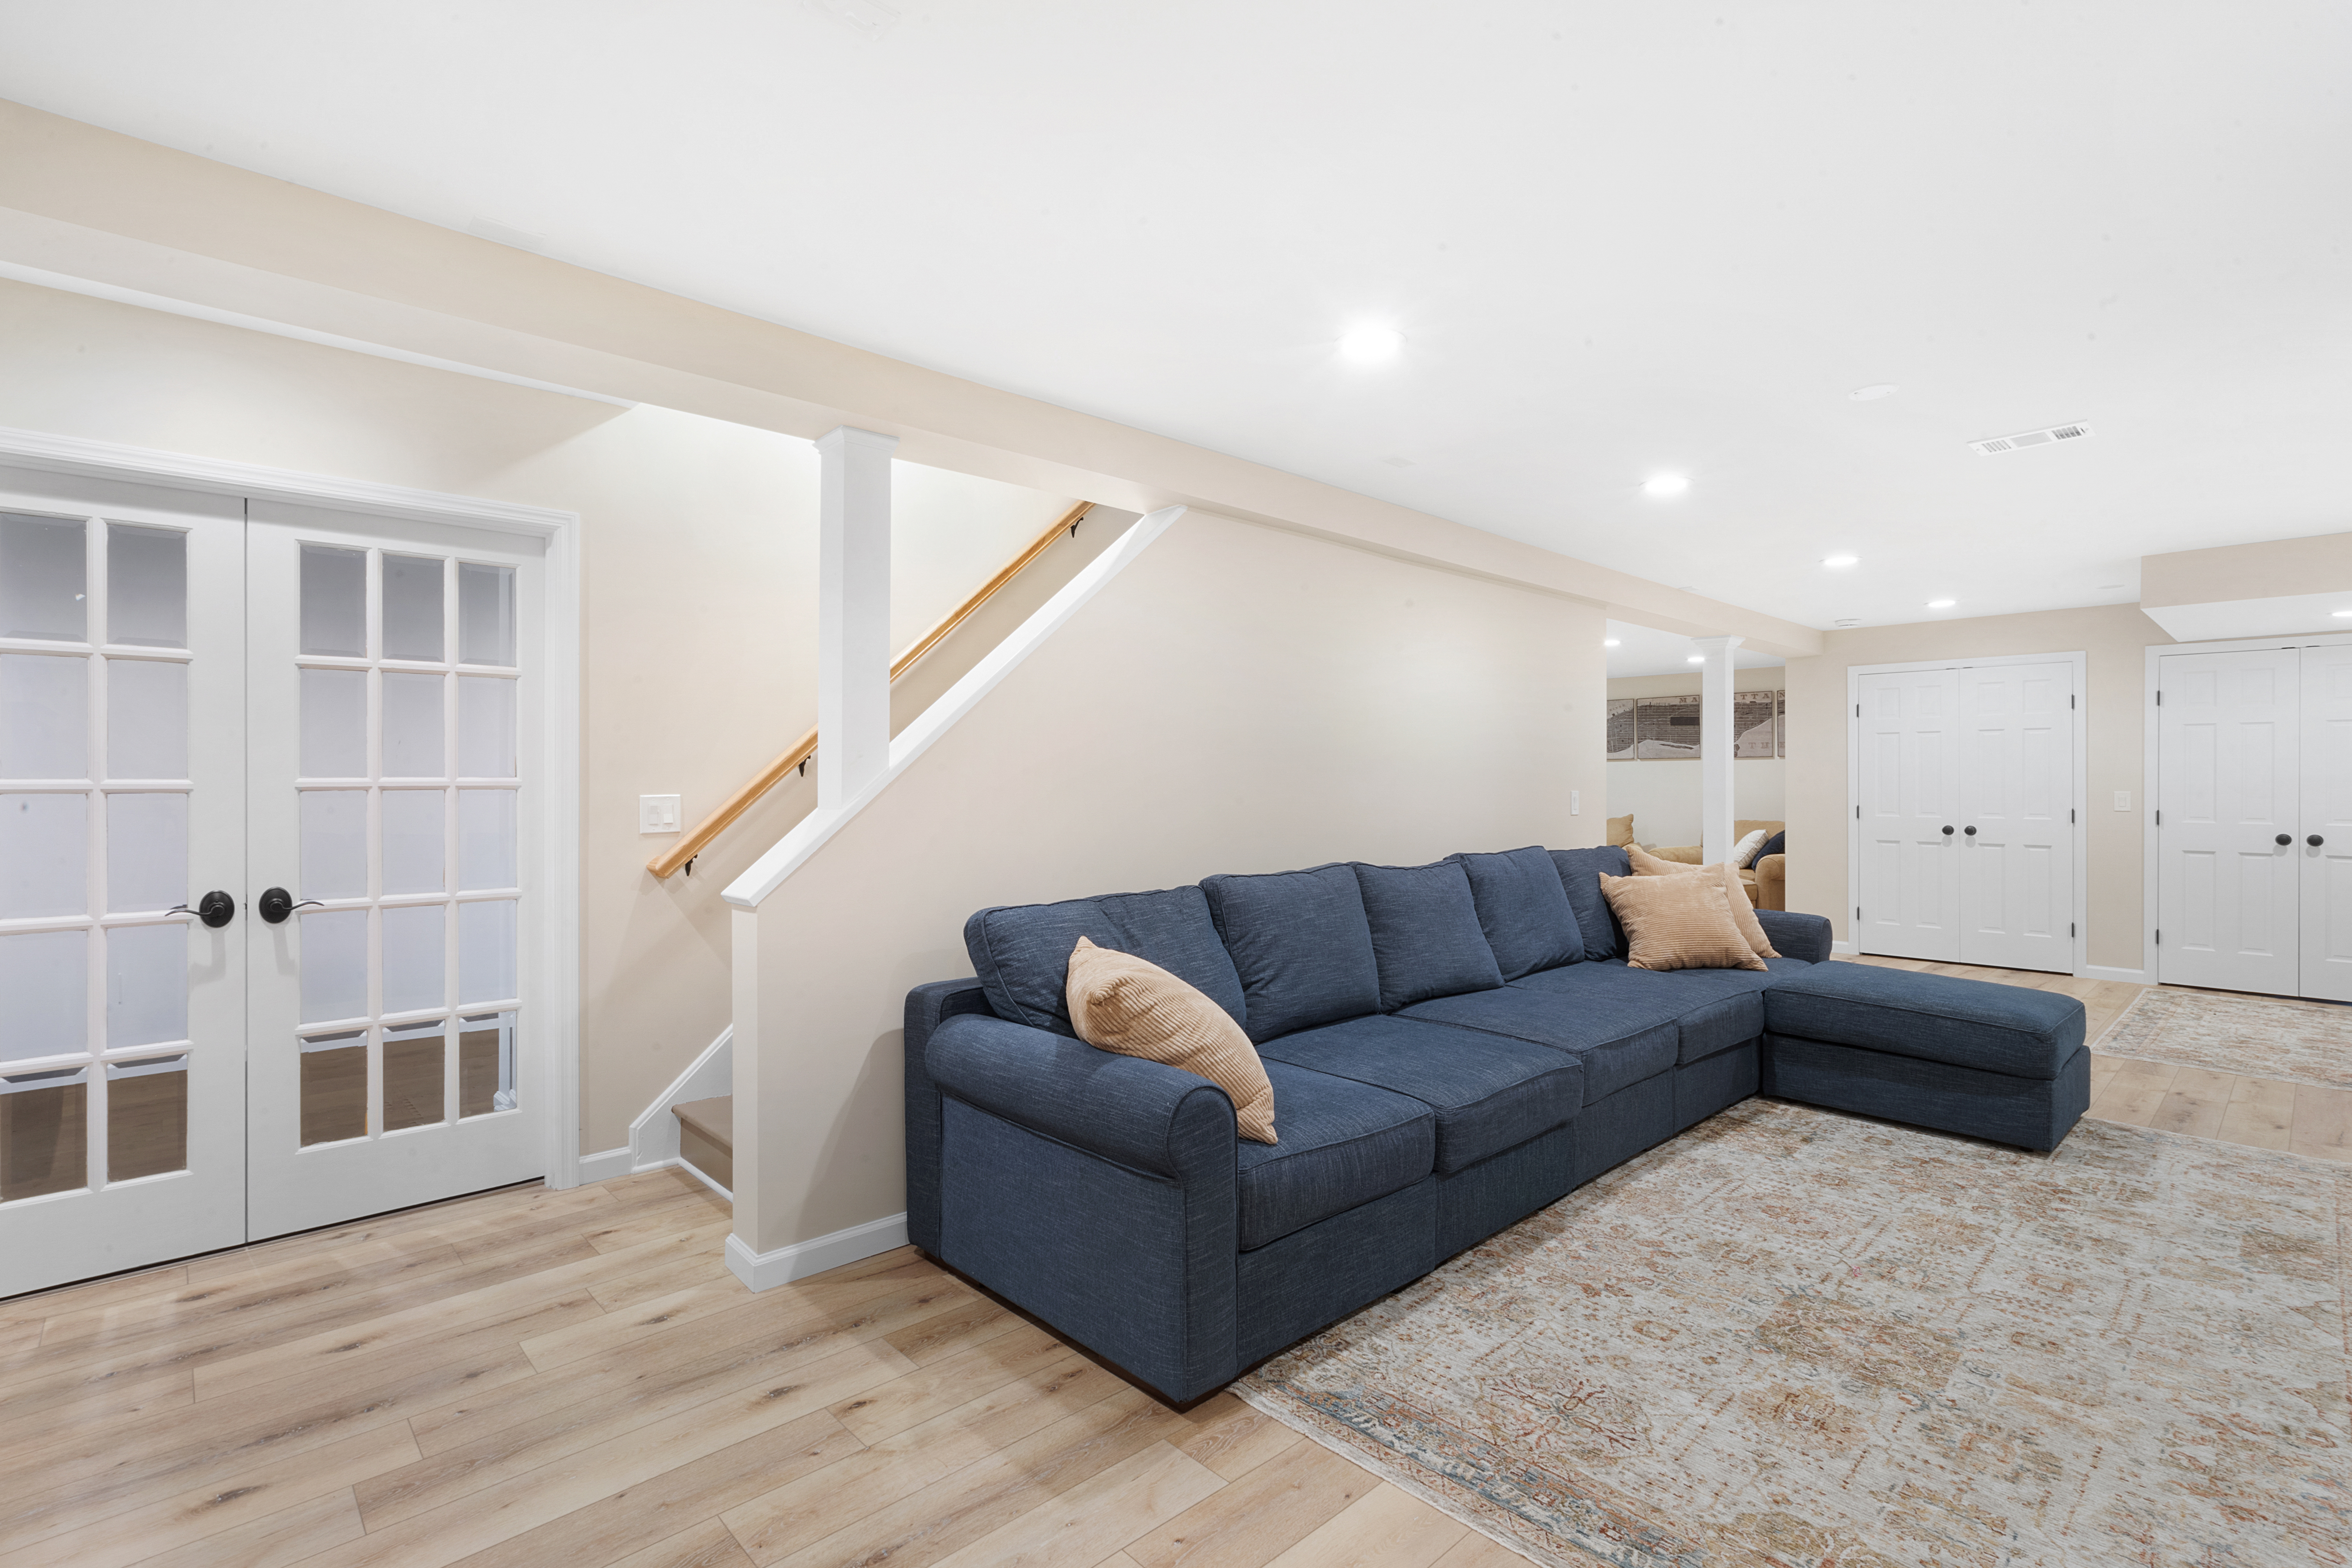 Basement remodel with gym, bar and family room in Mendham, NJ